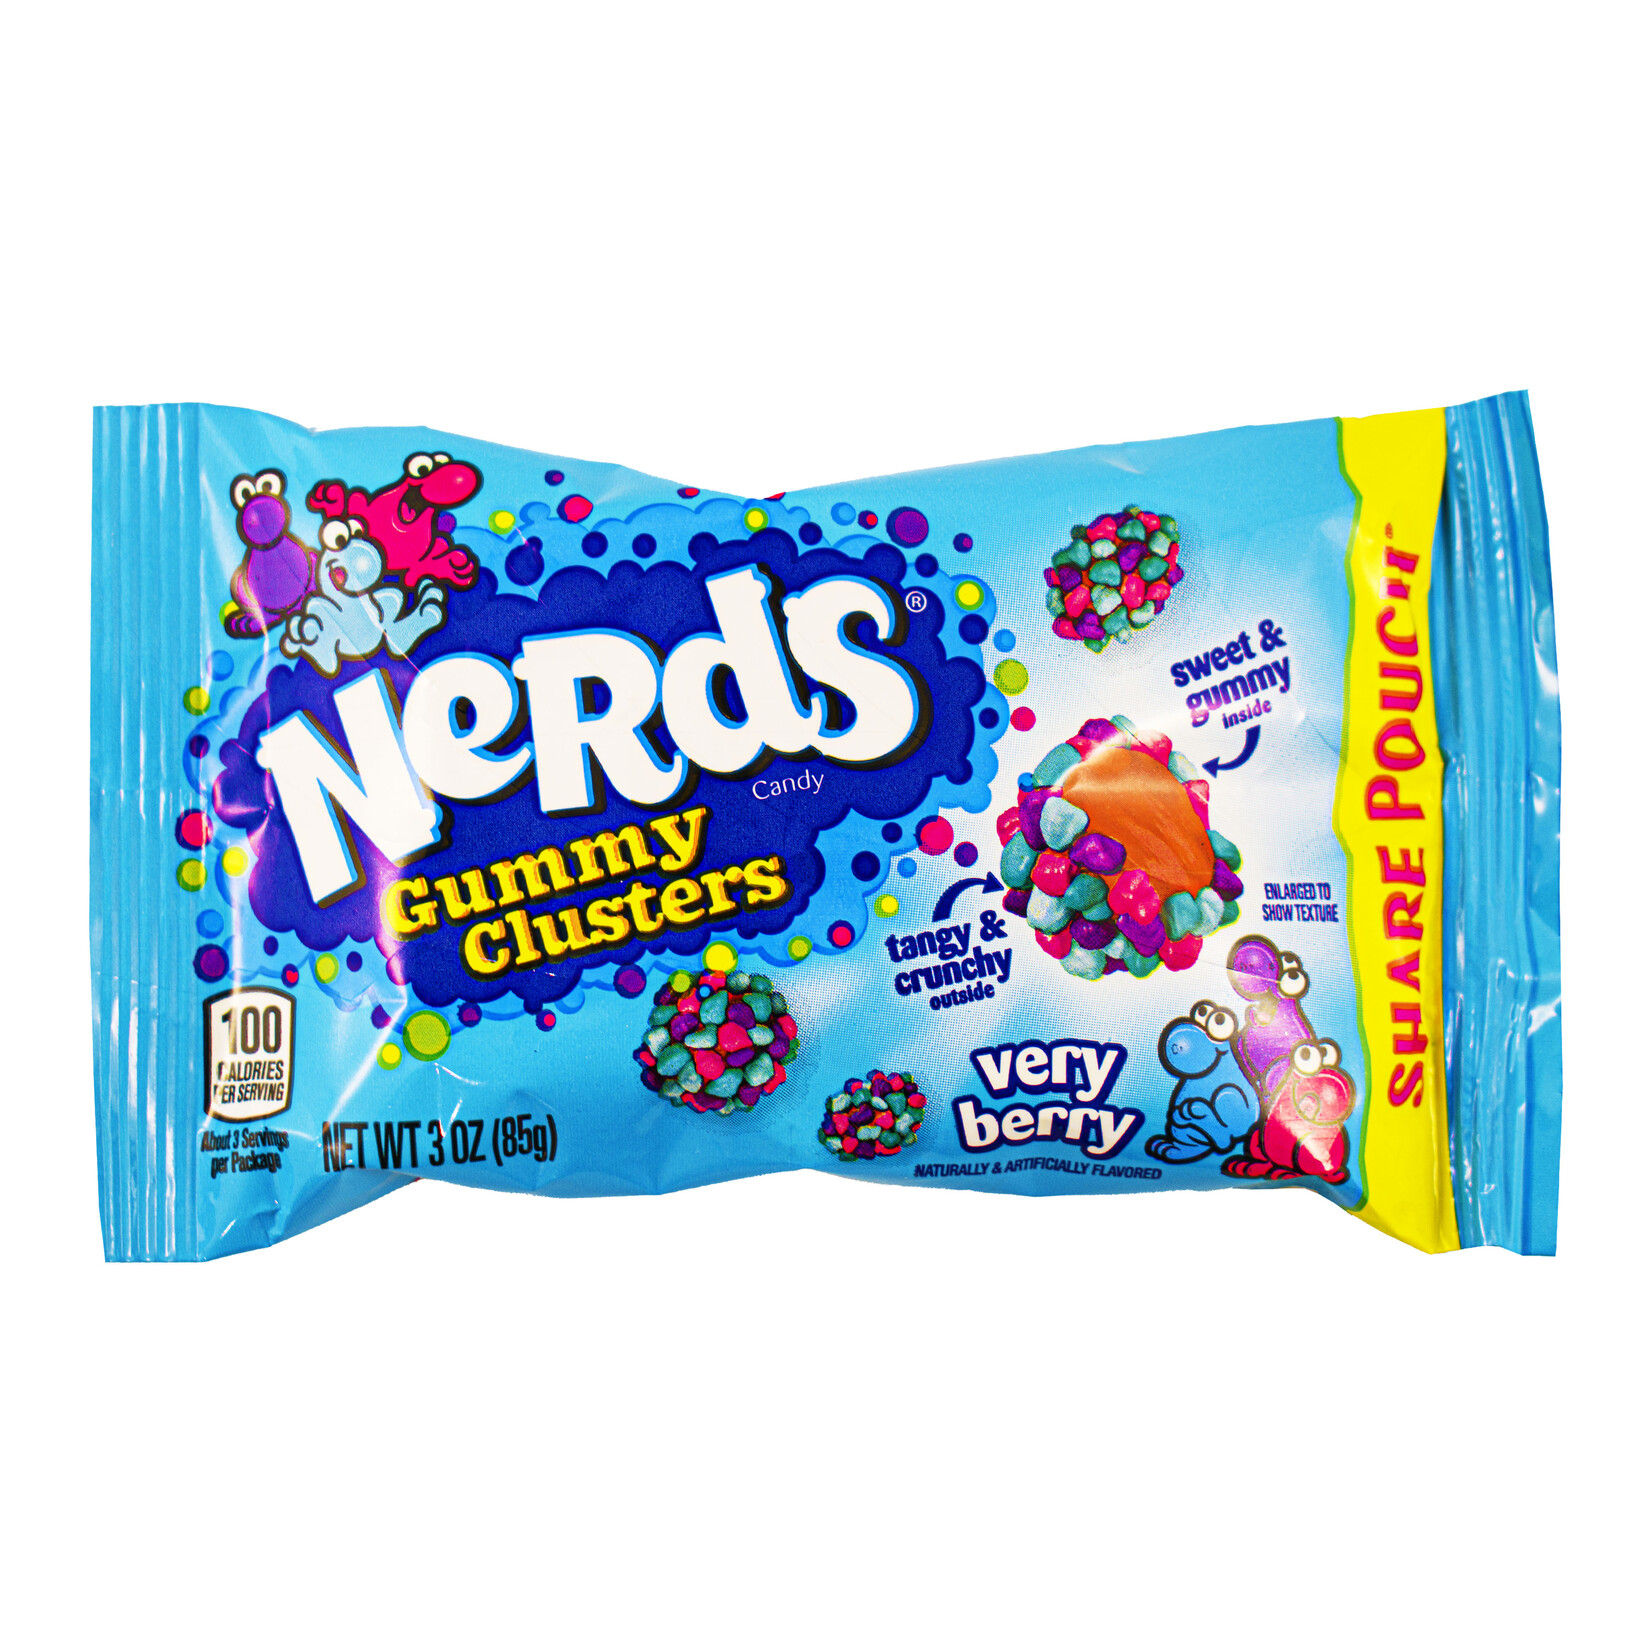 Nerds Gummy Clusters very berry